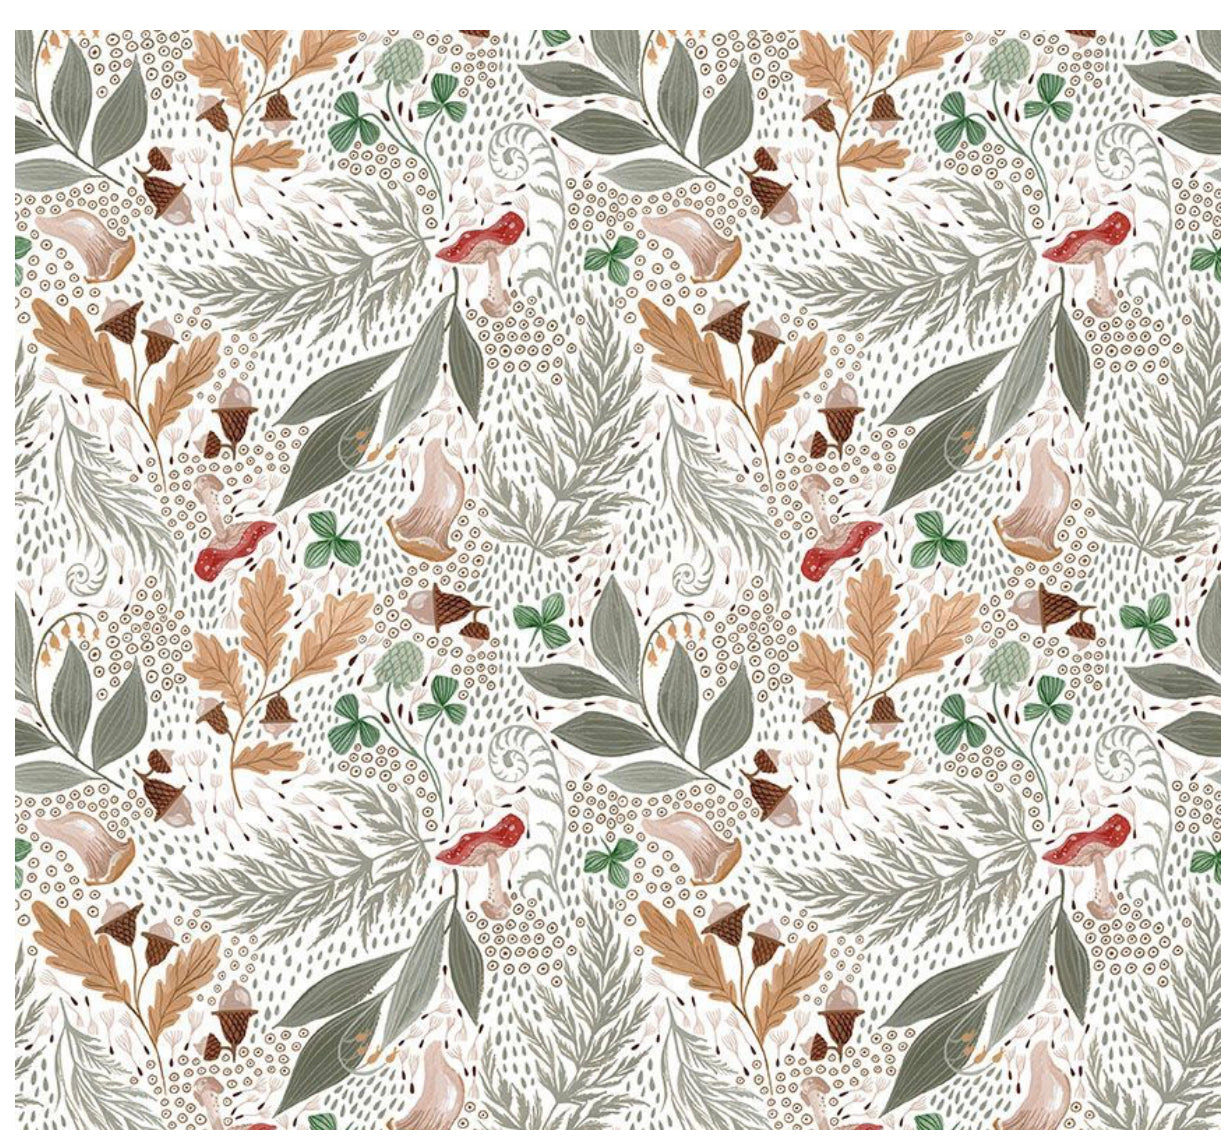 MYSTIC FLORAL by Rae Ritchie for Dear Stella, 100% Cotton, Toad Hollow Fabrics